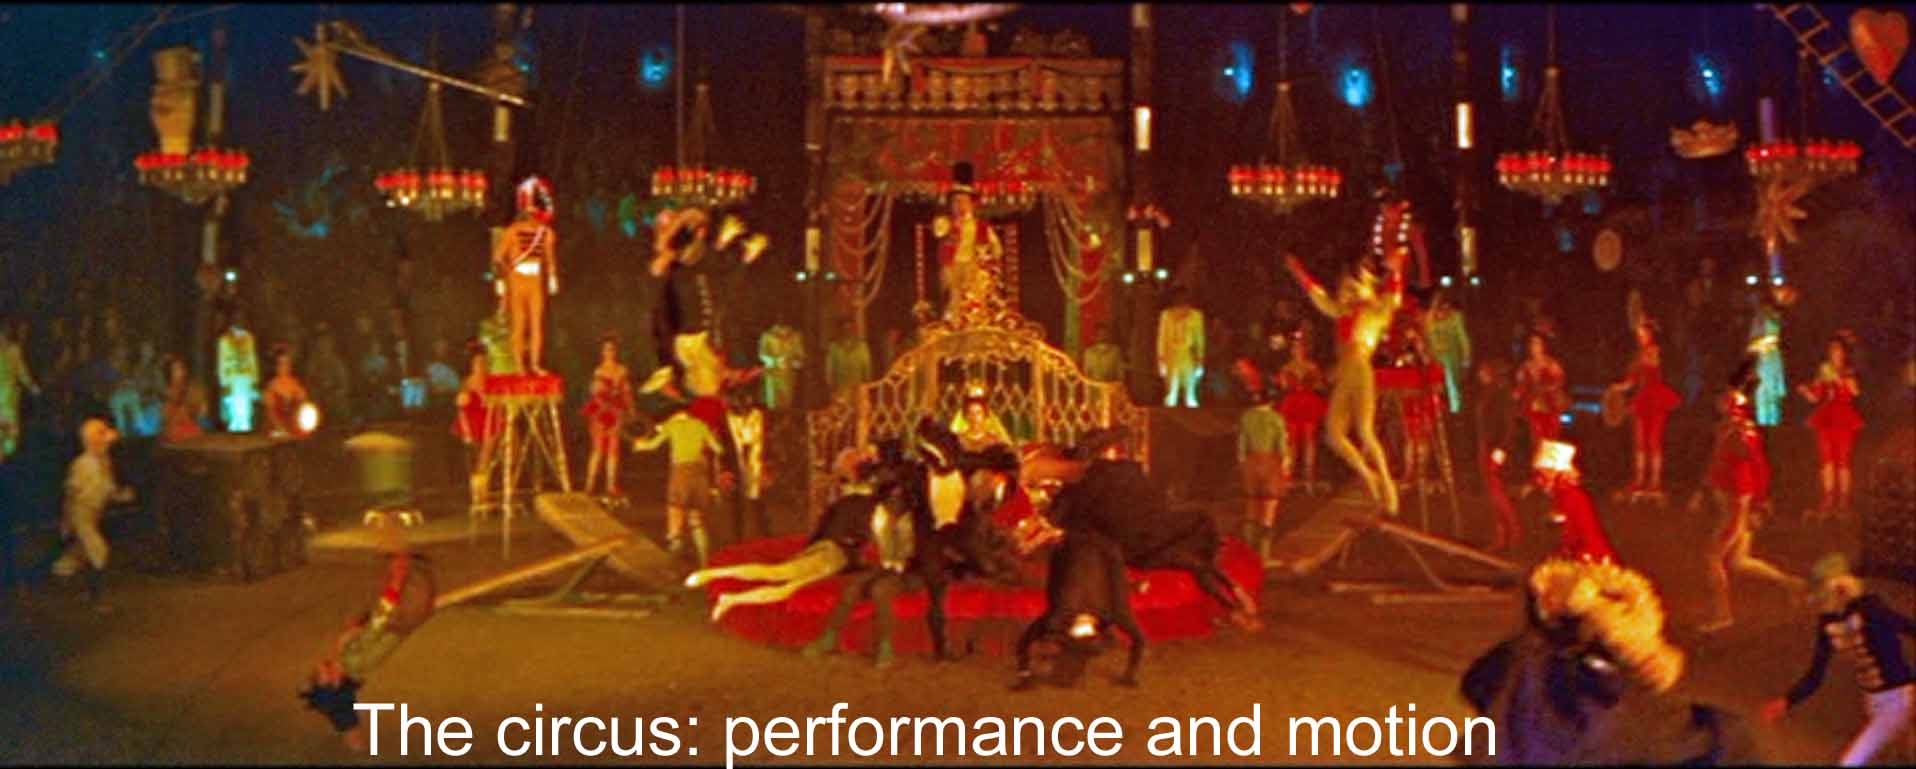 The circus: performance and motion